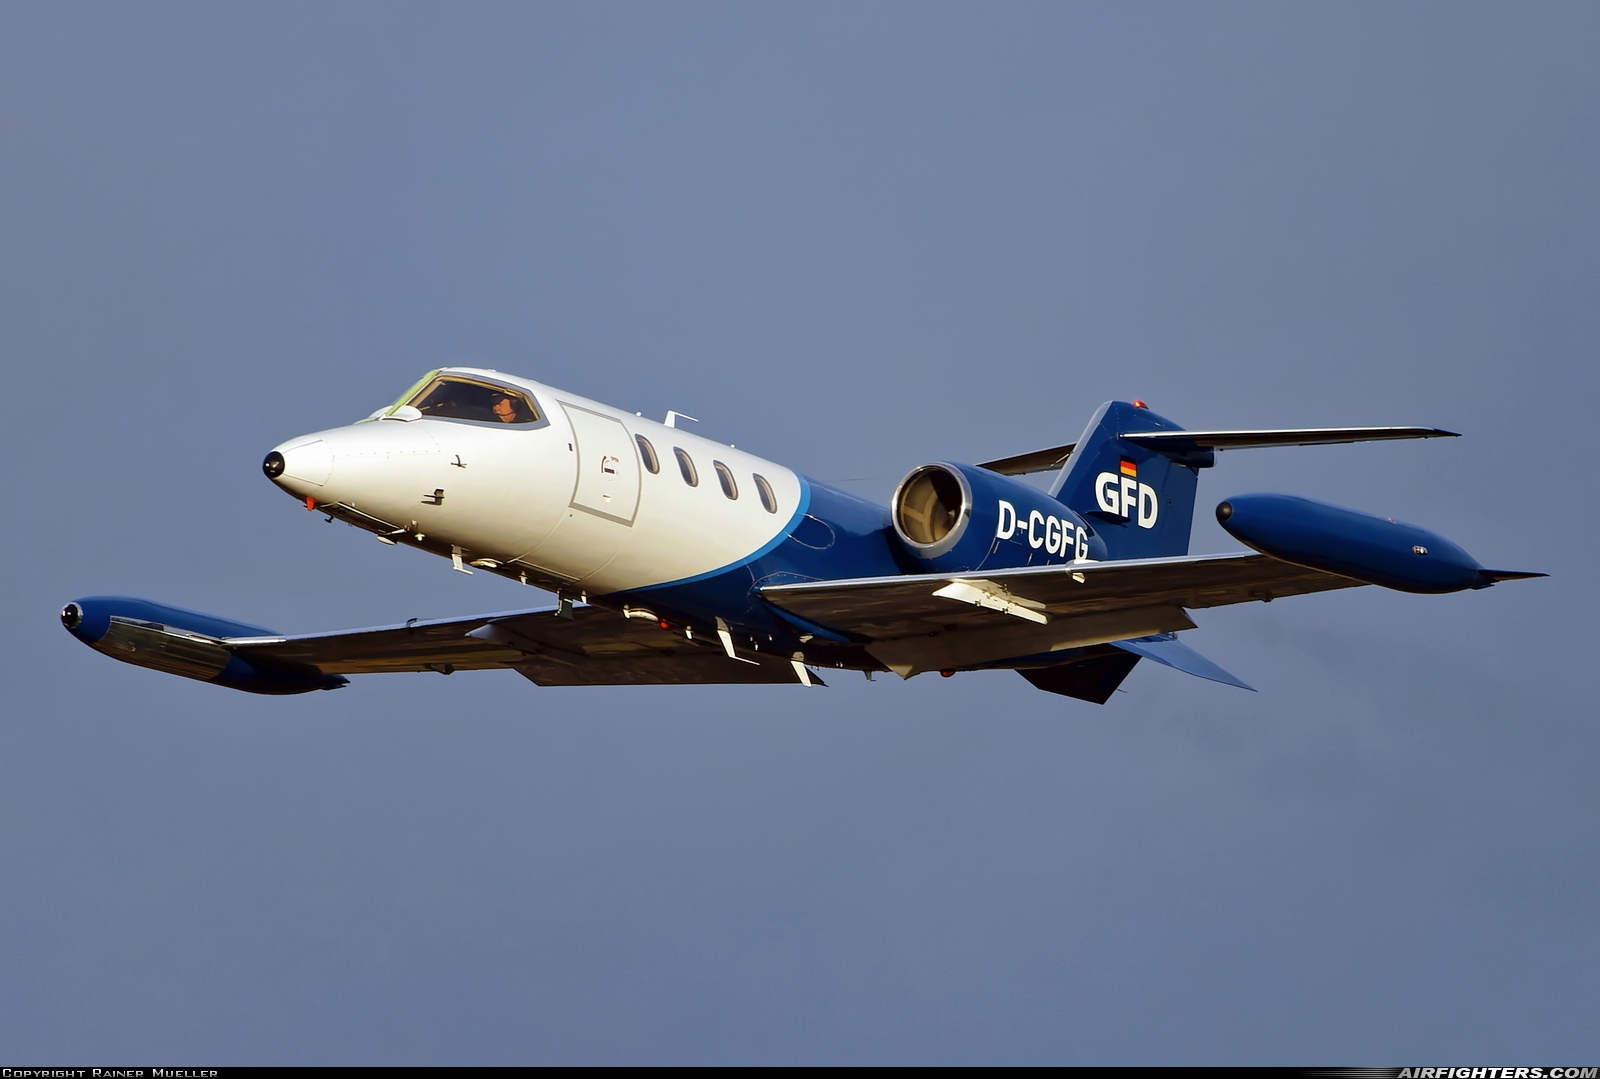 Company Owned - GFD Learjet 35A D-CGFG at Wunstorf (ETNW), Germany